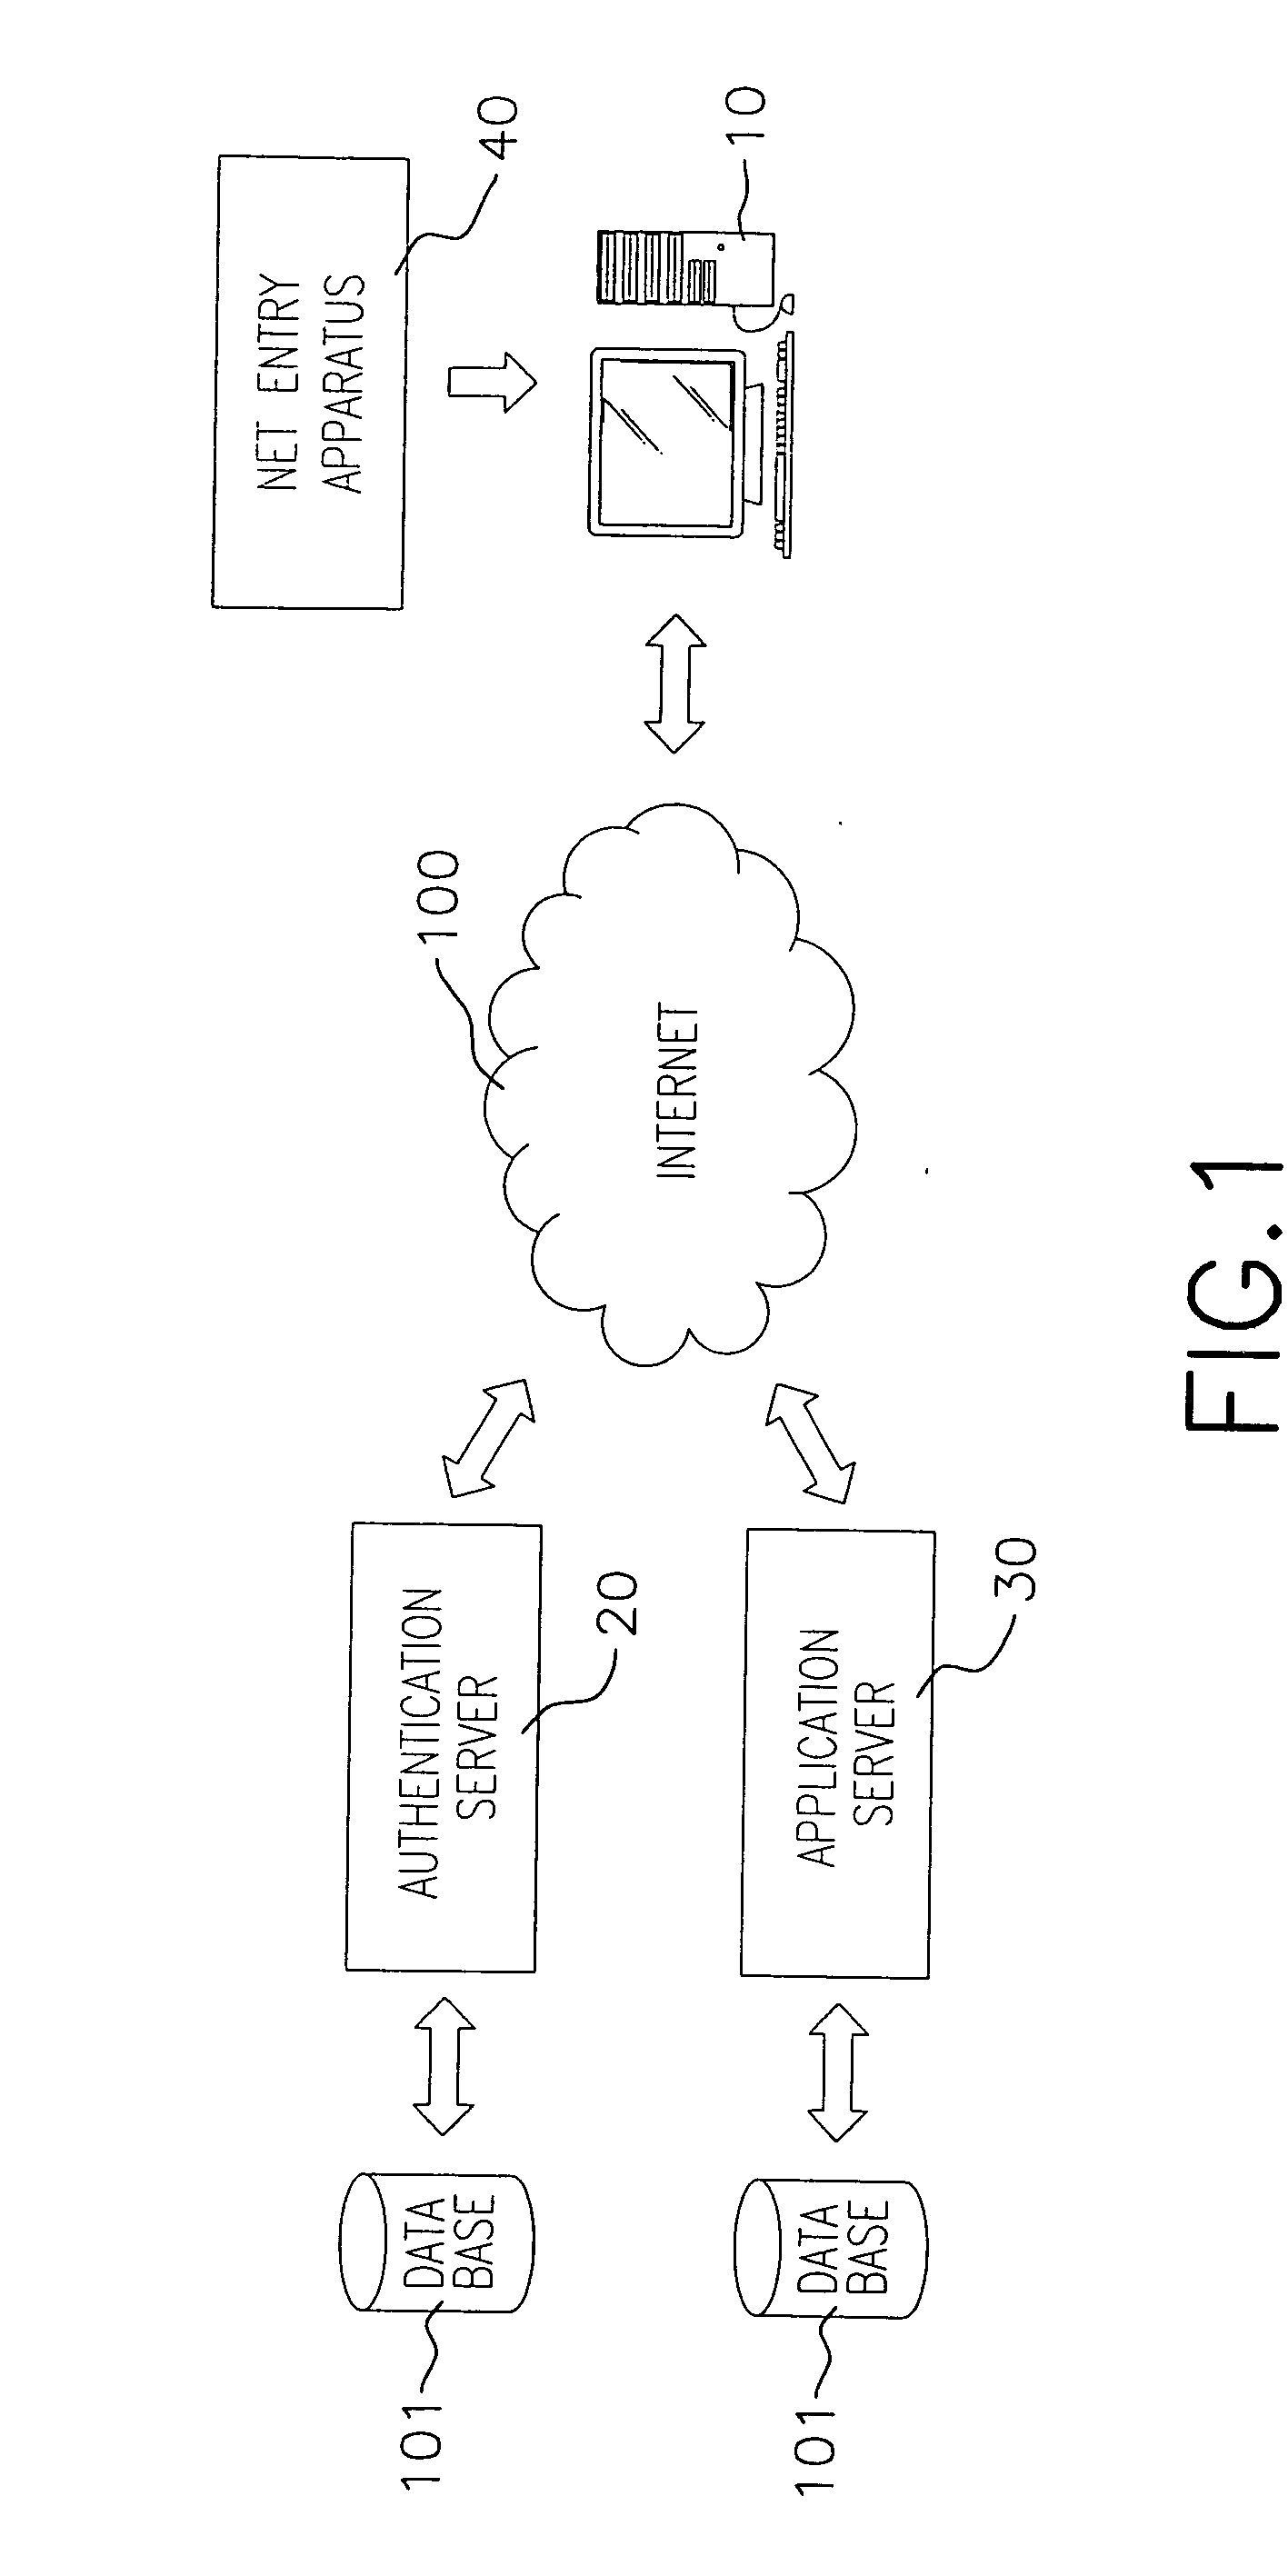 Method of authenticating user access to network stations